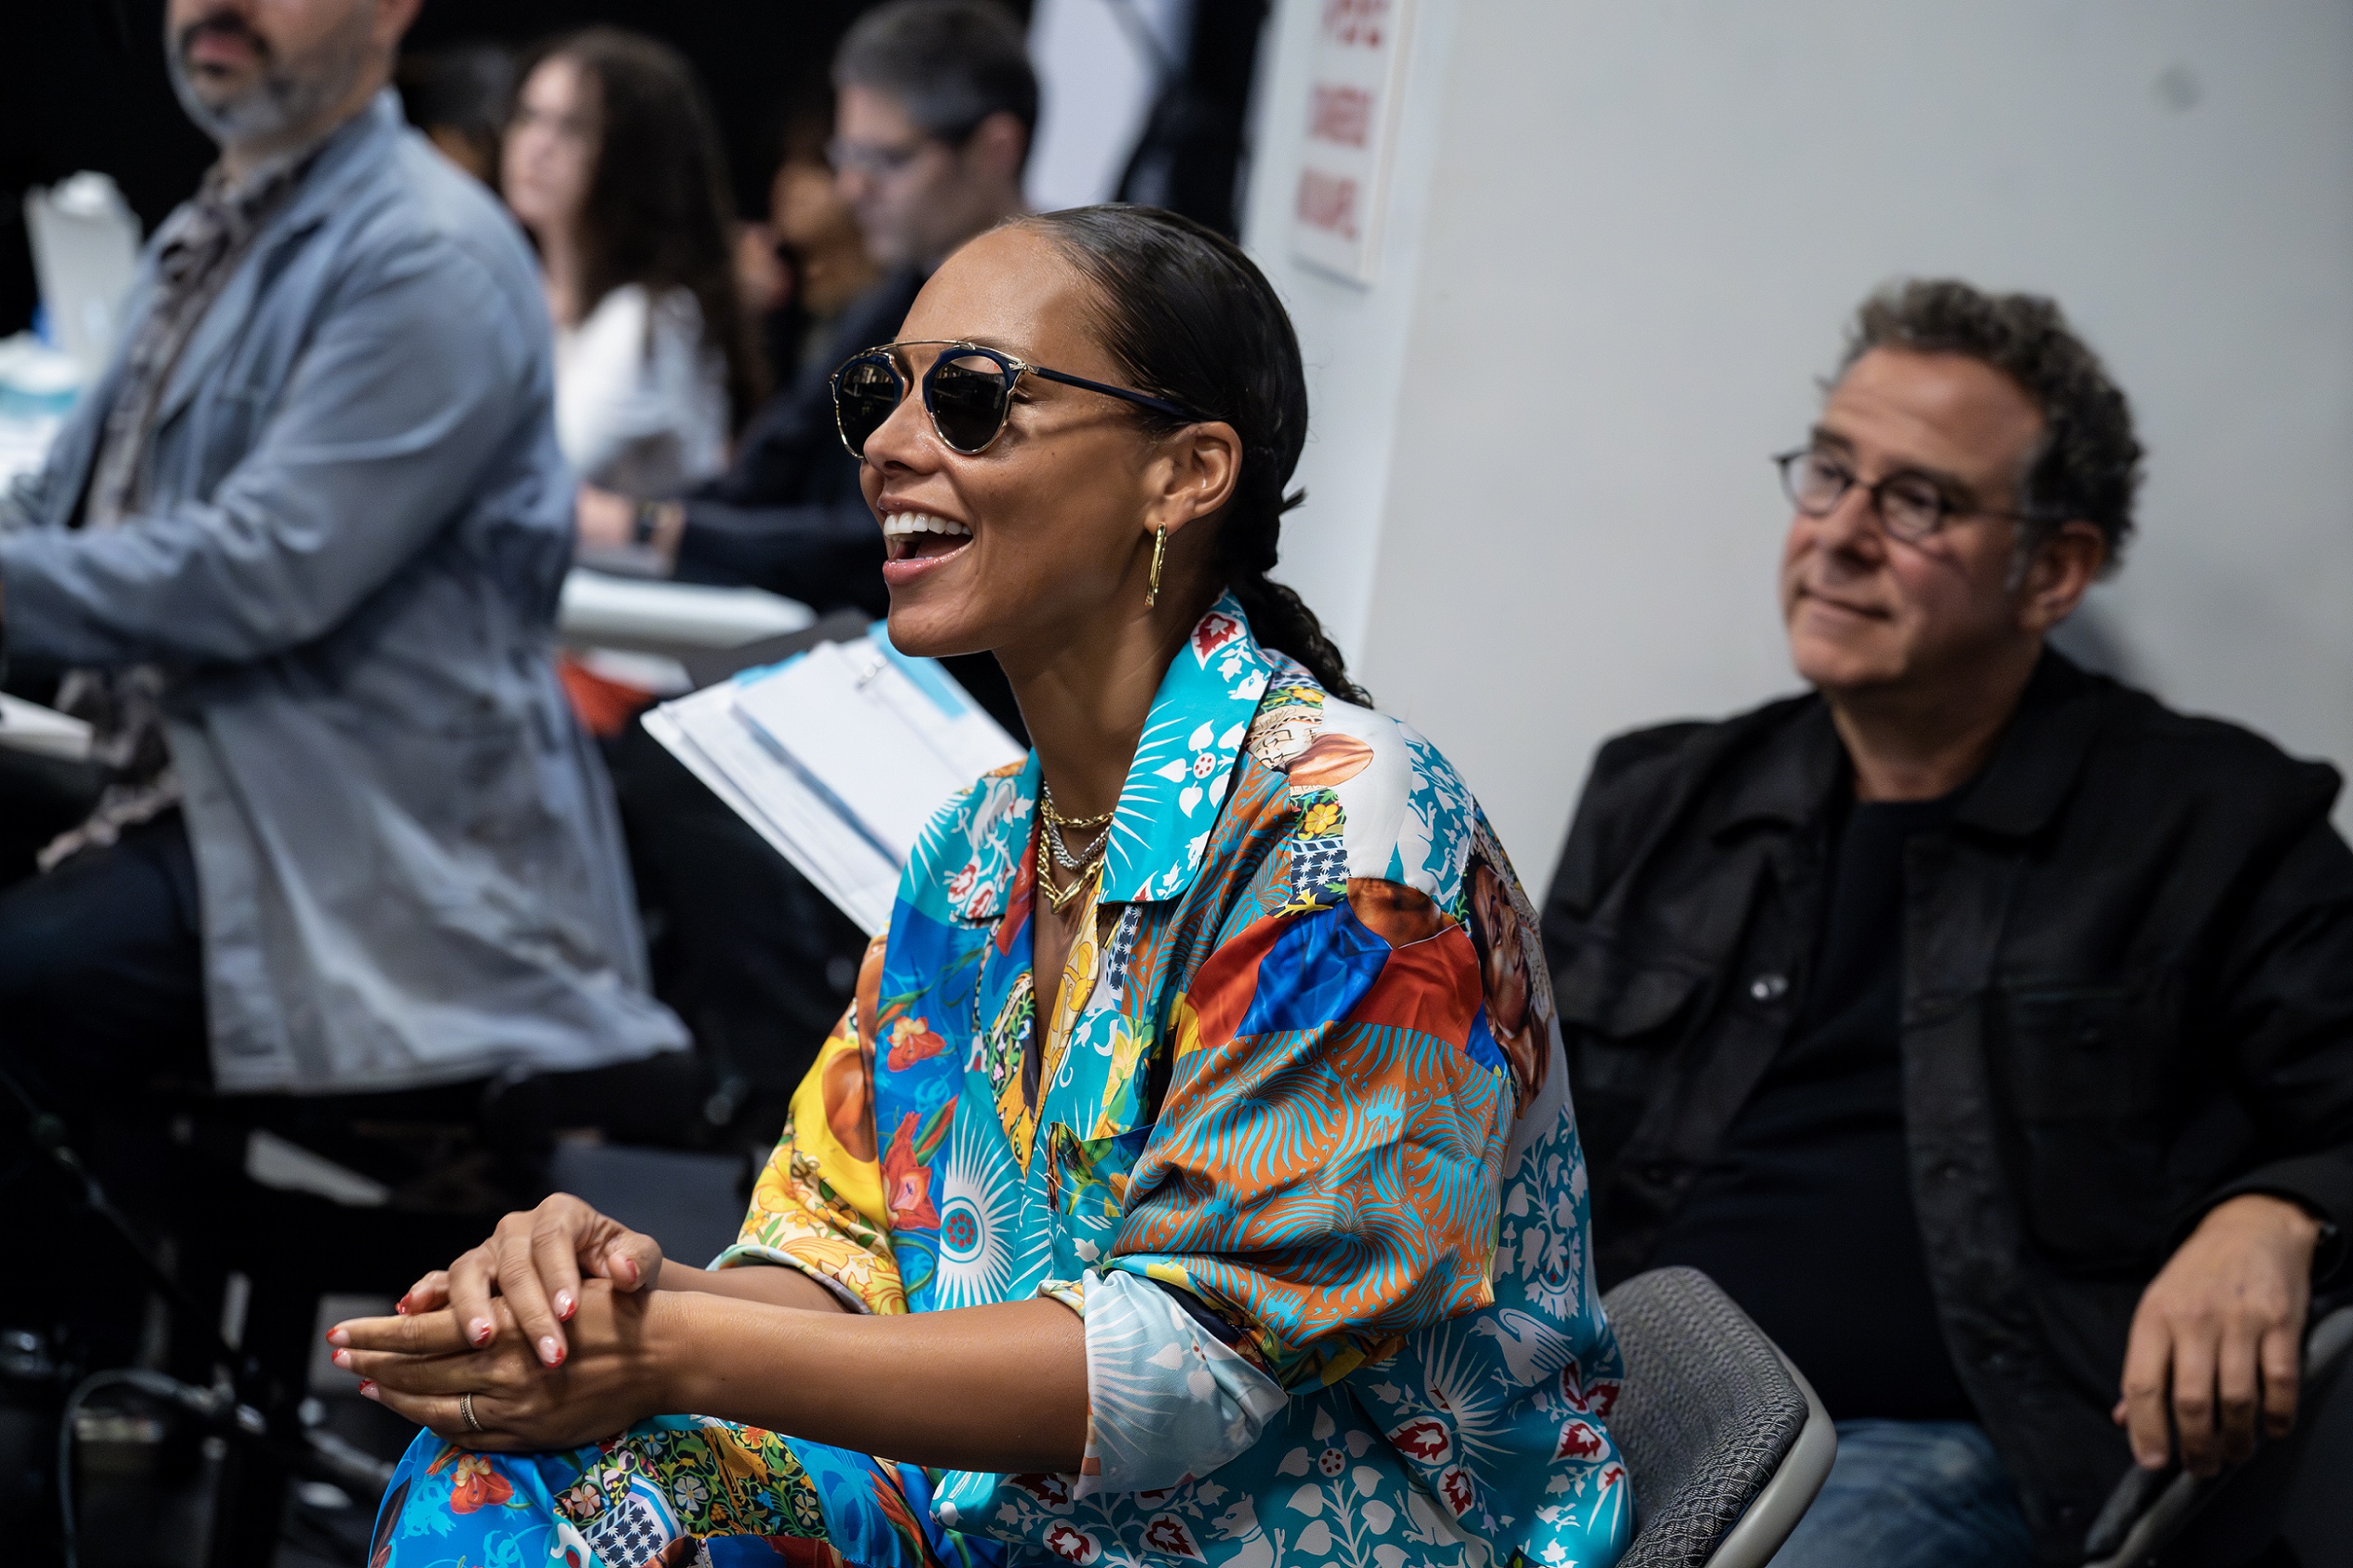 Composer Alicia Keys in rehearsal for Hell’s Kitchen at The Public Theater. (© Joan Marcus)